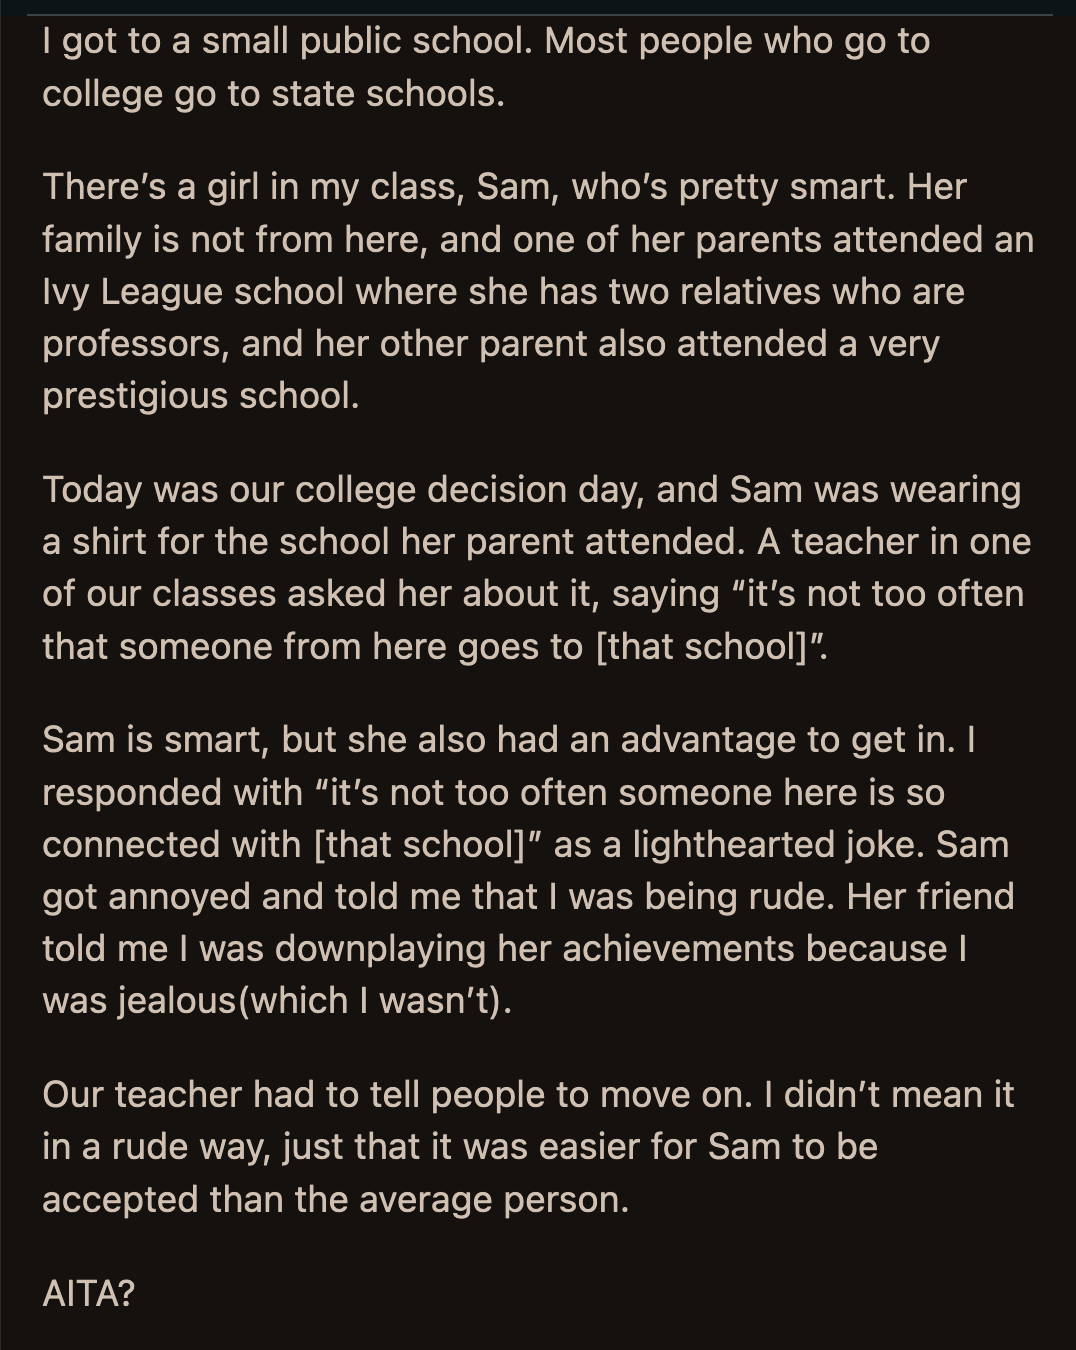 The disruption only ended when their teacher asked the class to move on. Did OP make an unfair comment about Sam?